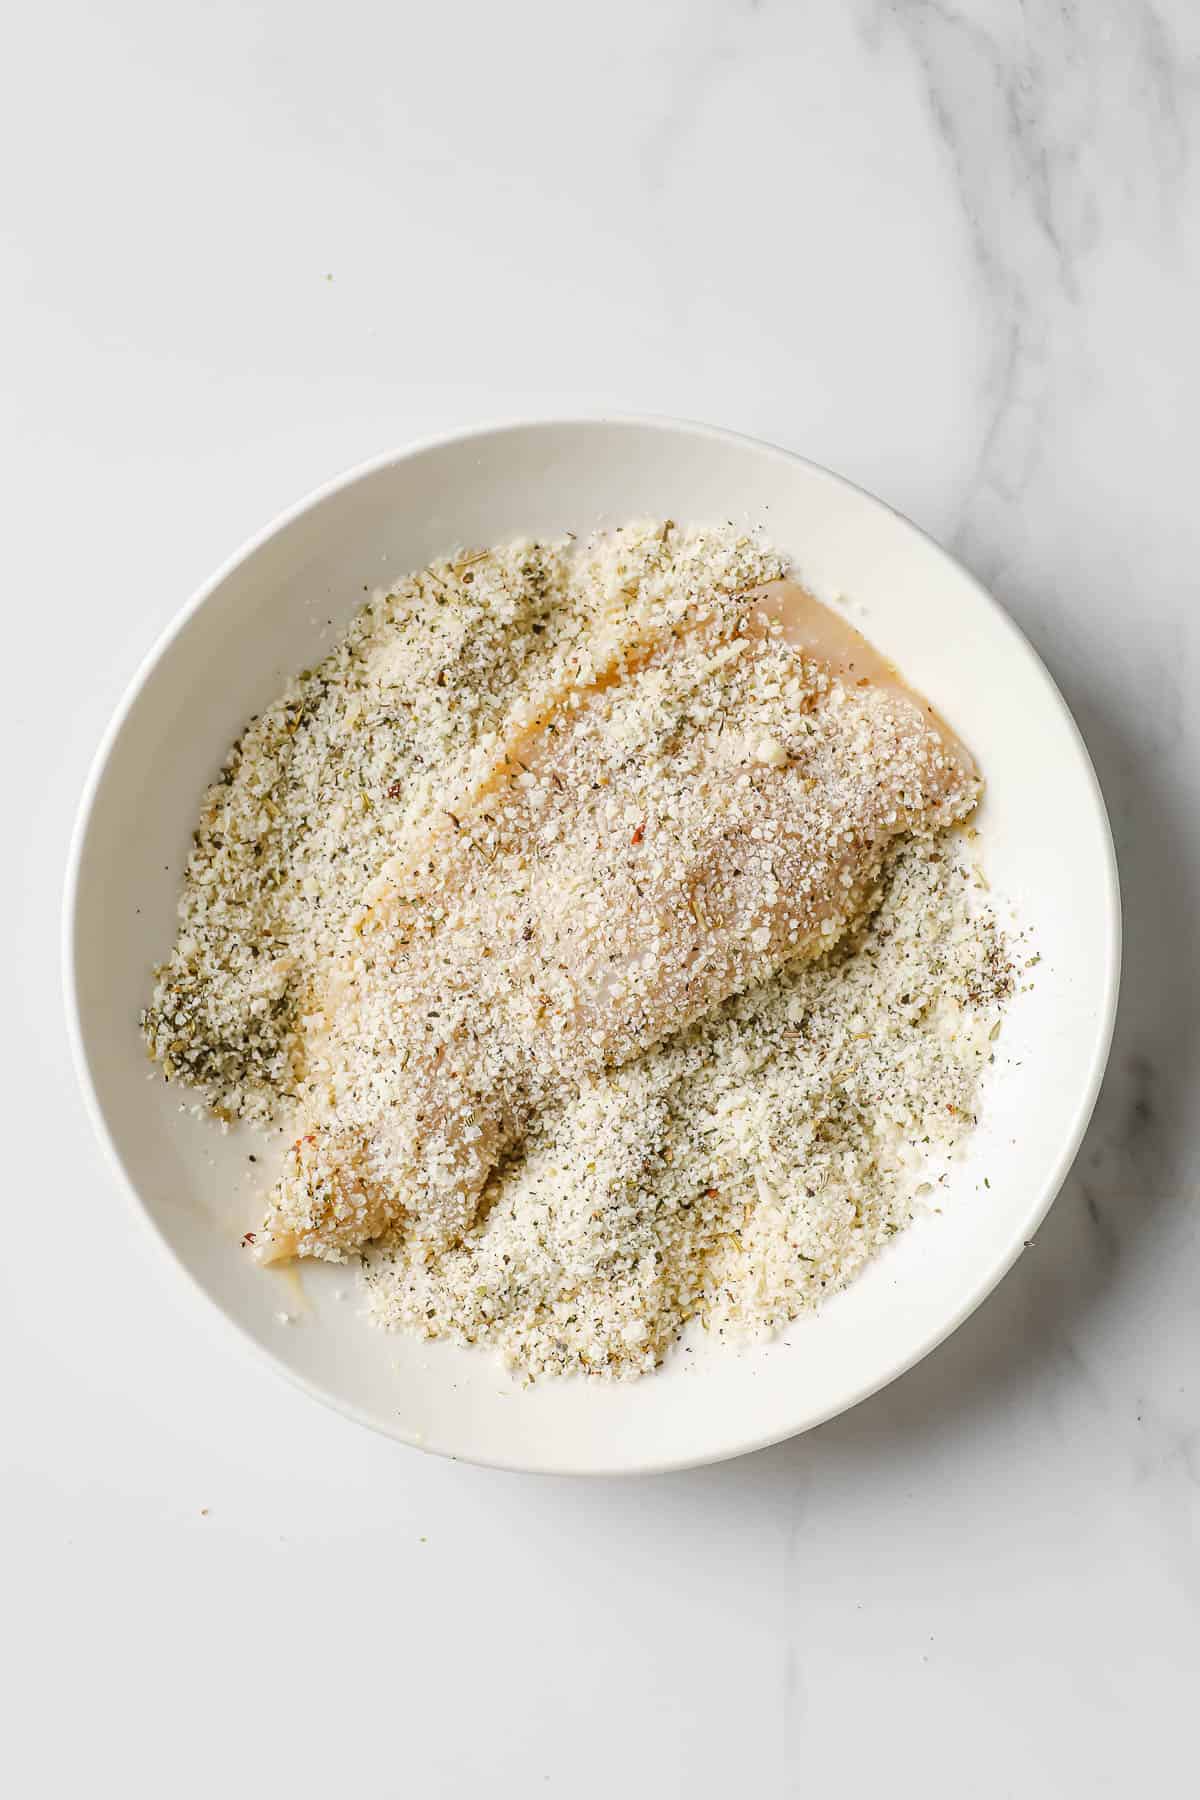 a white bowl with a raw chicken breast being coated in parmesan cheese and herbs